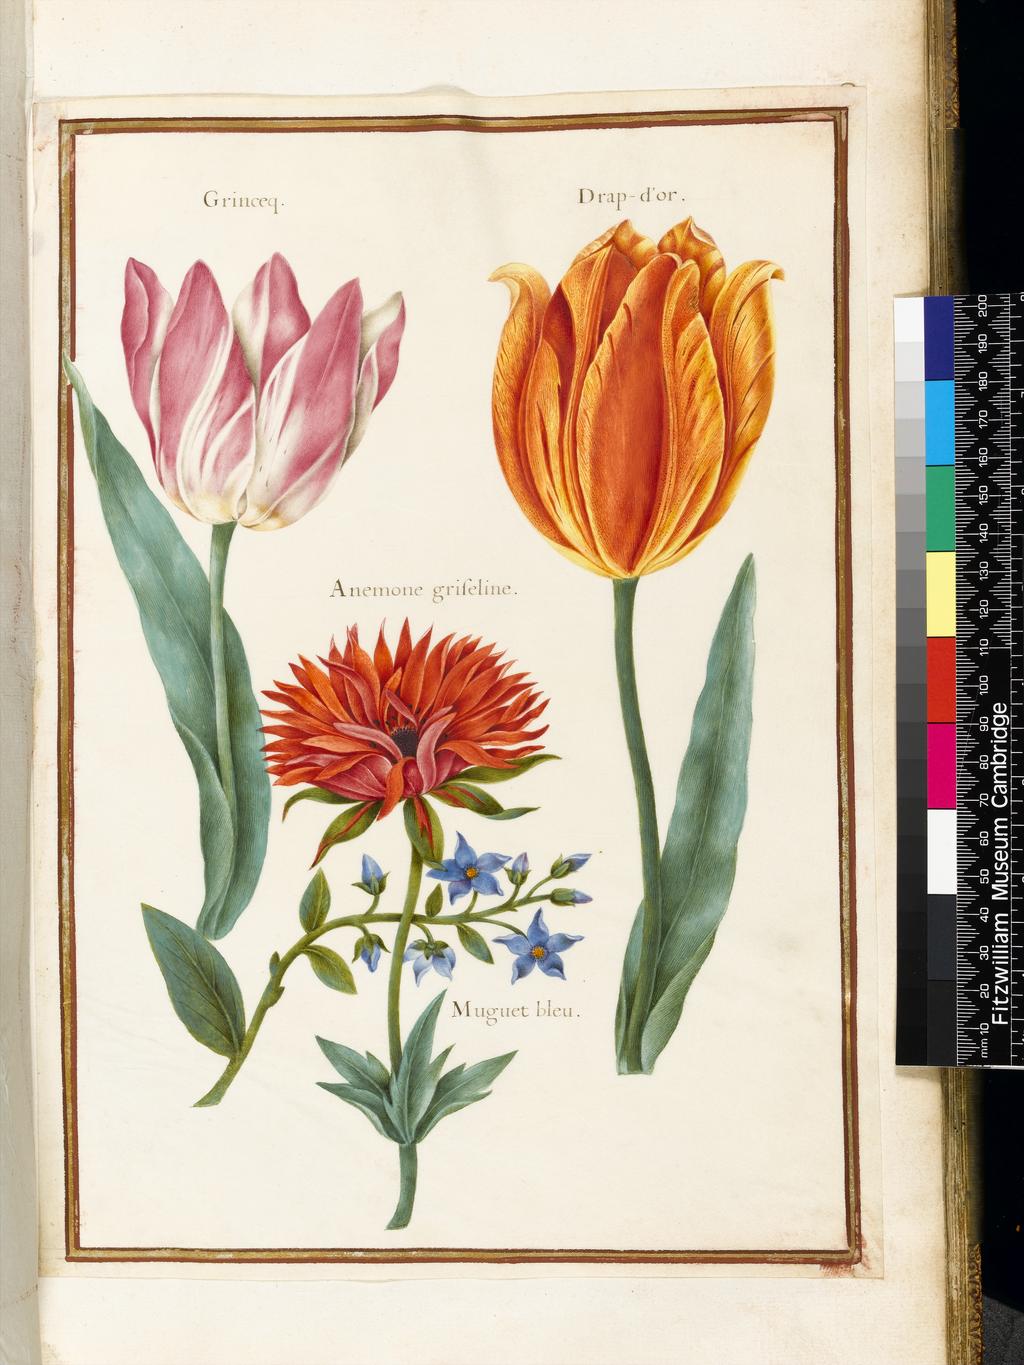 An image of Two 'broken' tulips and an Anemone. Robert, Nicolas attributed to (French, 1614-1685). Graphite, watercolour and bodycolour on vellum, height 314 mm, width 224 mm. Album containing 62 botanical drawings on vellum tipped in on the gilt-edged pages of the album which bear the watermark of an 18th century French paper-maker, Malmenayde of Thiers (active from 1731). Bound in red morocco with clasps, the spine tooled in gilt. The Pages are interleaved with thin protective paper. Ruled lines of red and gold border the drawings on all sides. 17th Century. French.